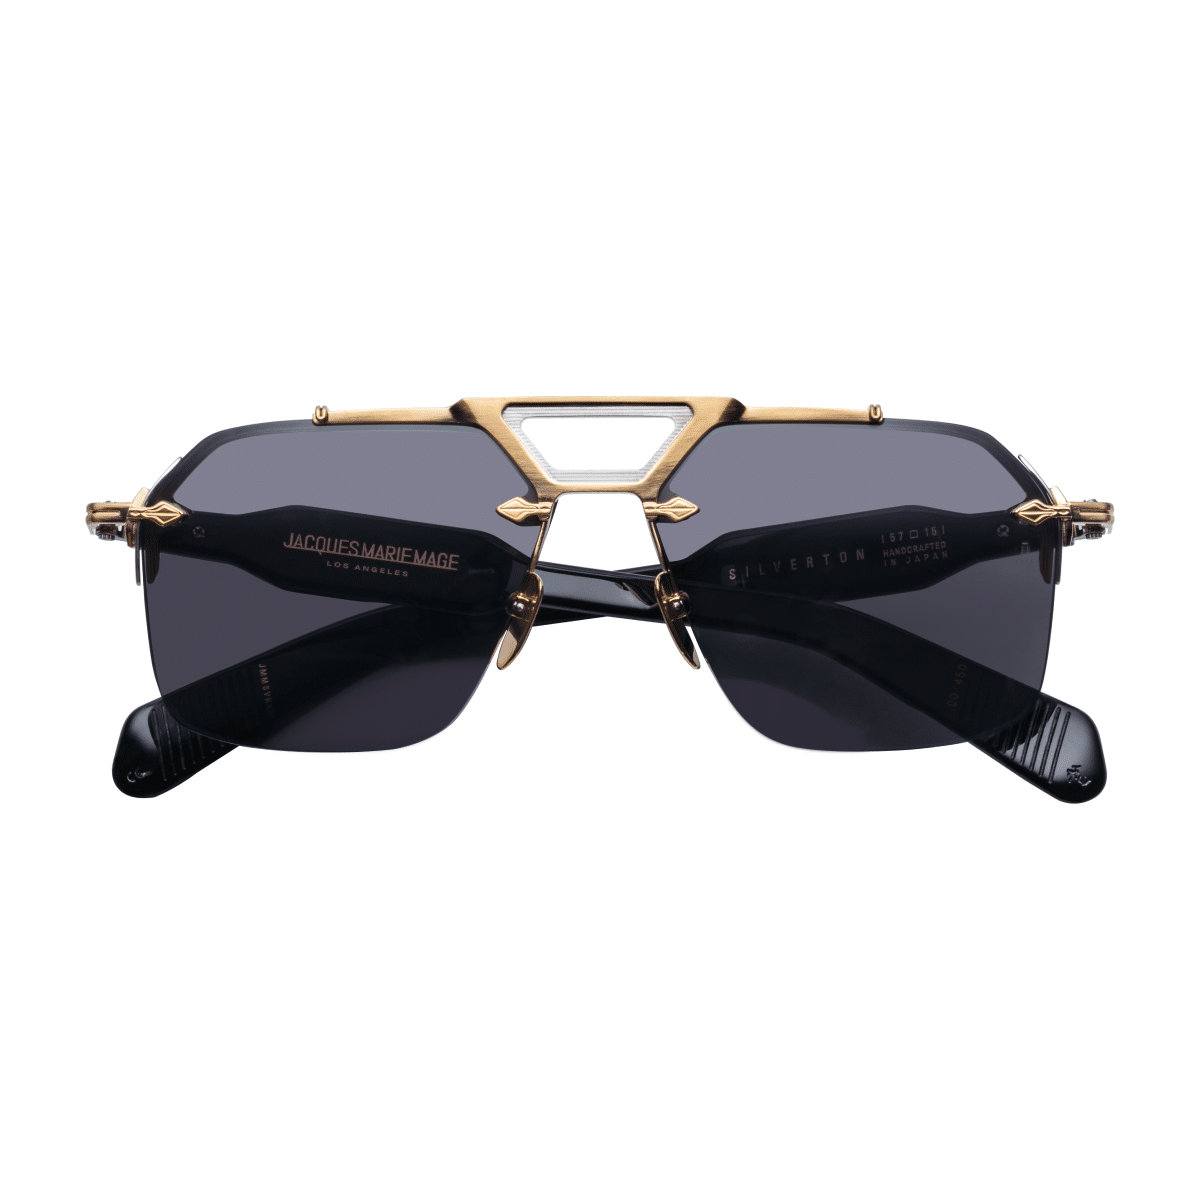 picture of Jacques Marie Mage SILVERTON Sunglasses 86990290